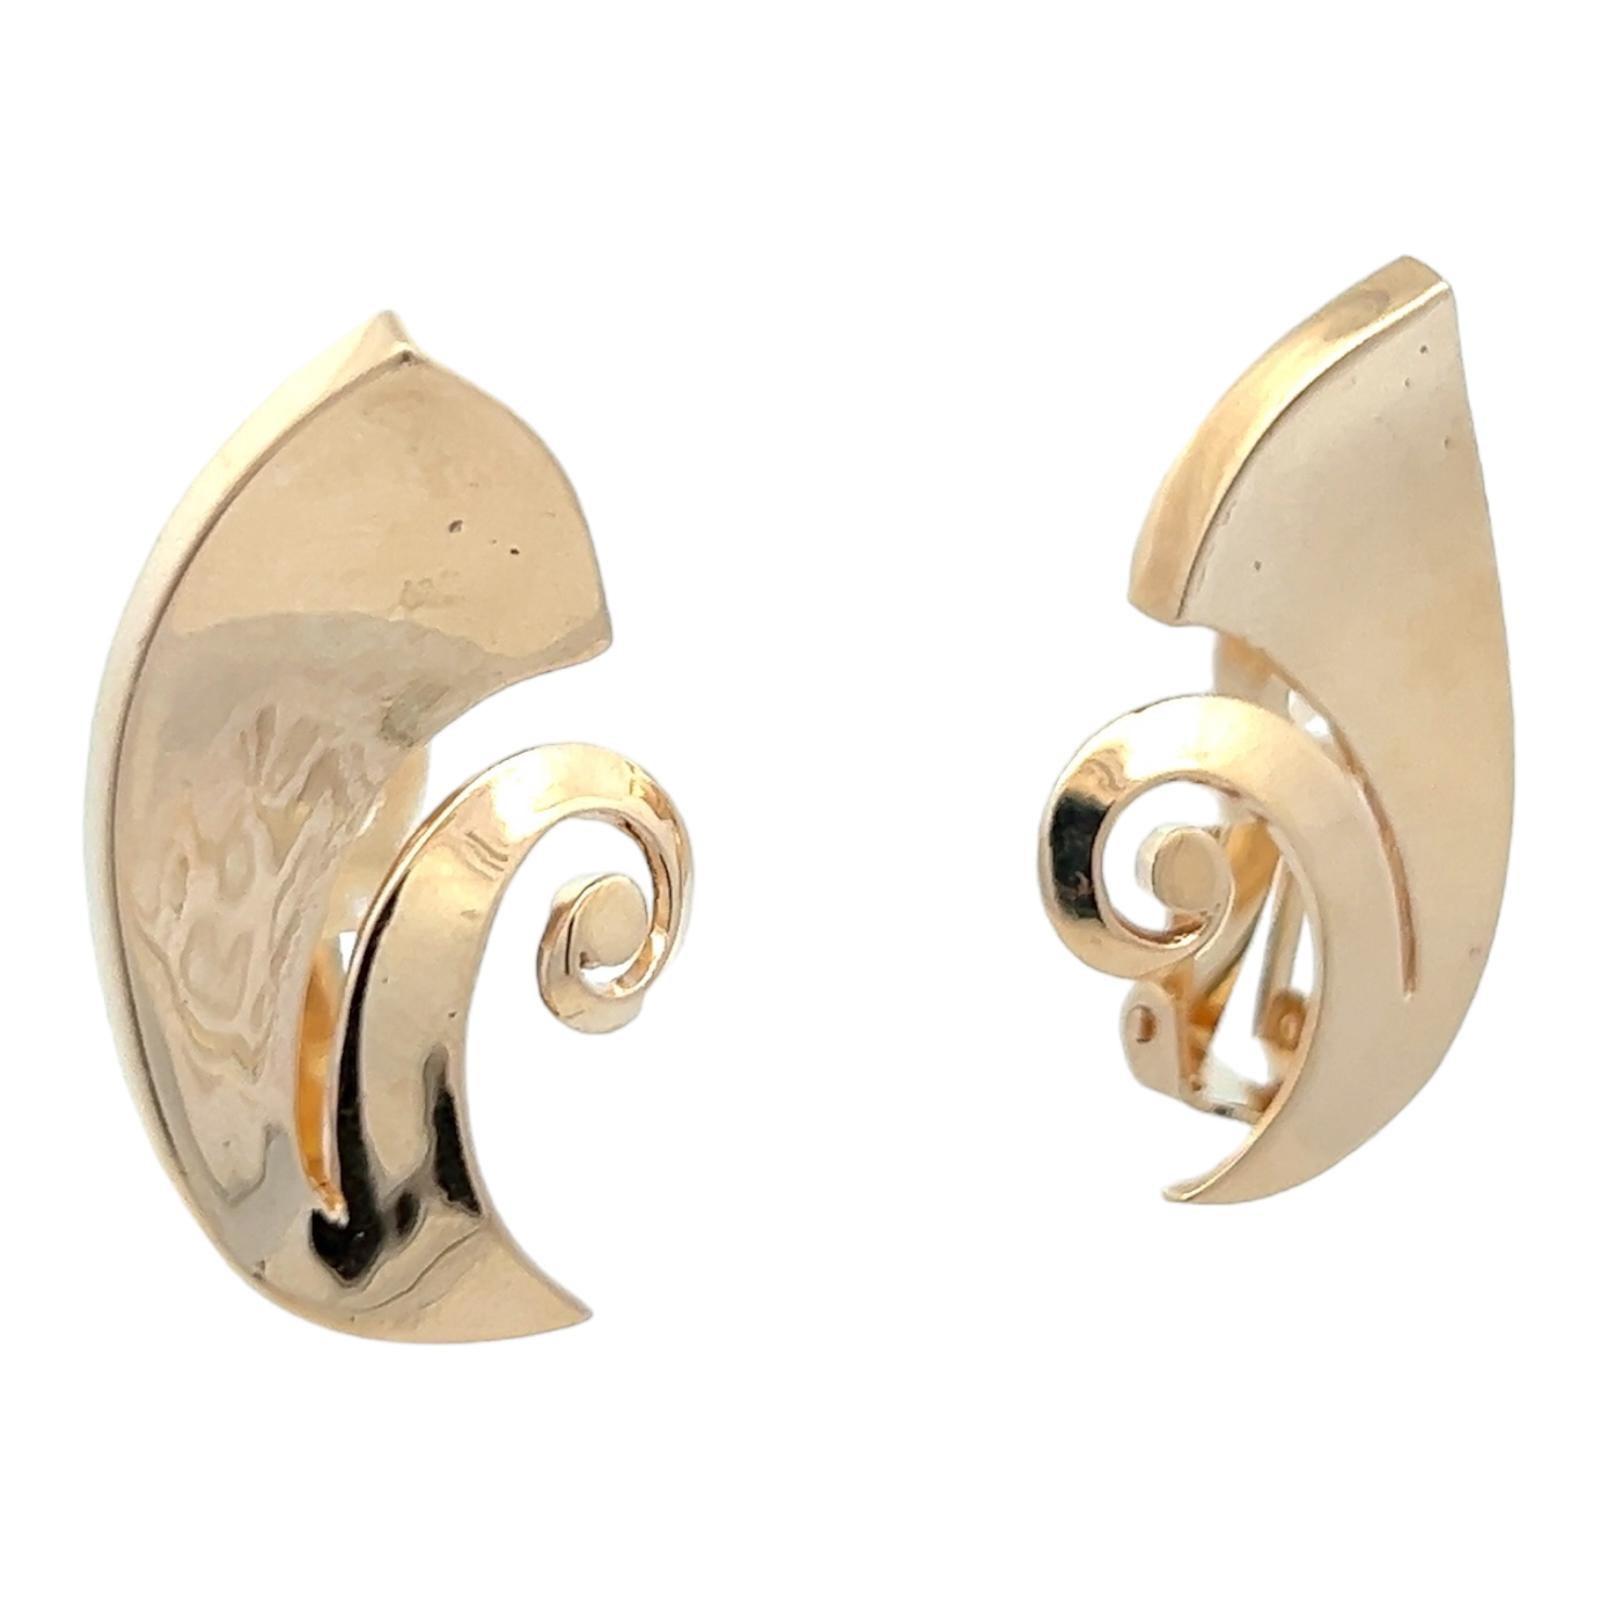 1950's Retro 14 Karat Yellow Gold High Polish Swril Earclip Earrings  In Excellent Condition For Sale In Boca Raton, FL